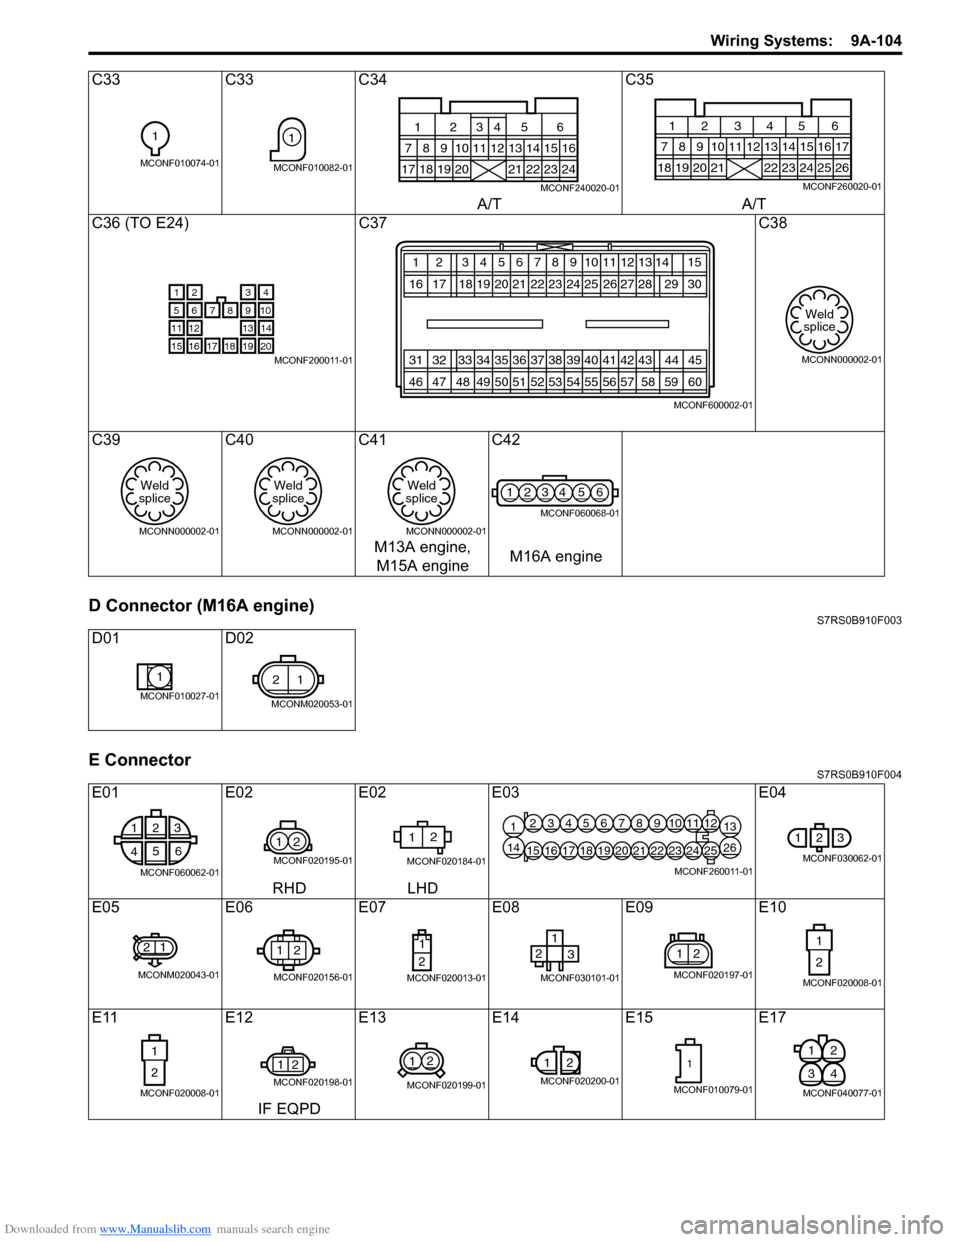 SUZUKI SWIFT 2005 2.G Service User Guide Downloaded from www.Manualslib.com manuals search engine Wiring Systems:  9A-104
D Connector (M16A engine)S7RS0B910F003
E ConnectorS7RS0B910F004
C33C33C34 C35
A/T A/T
C36 (TO E24) C37 C38
C39 C40C41 C